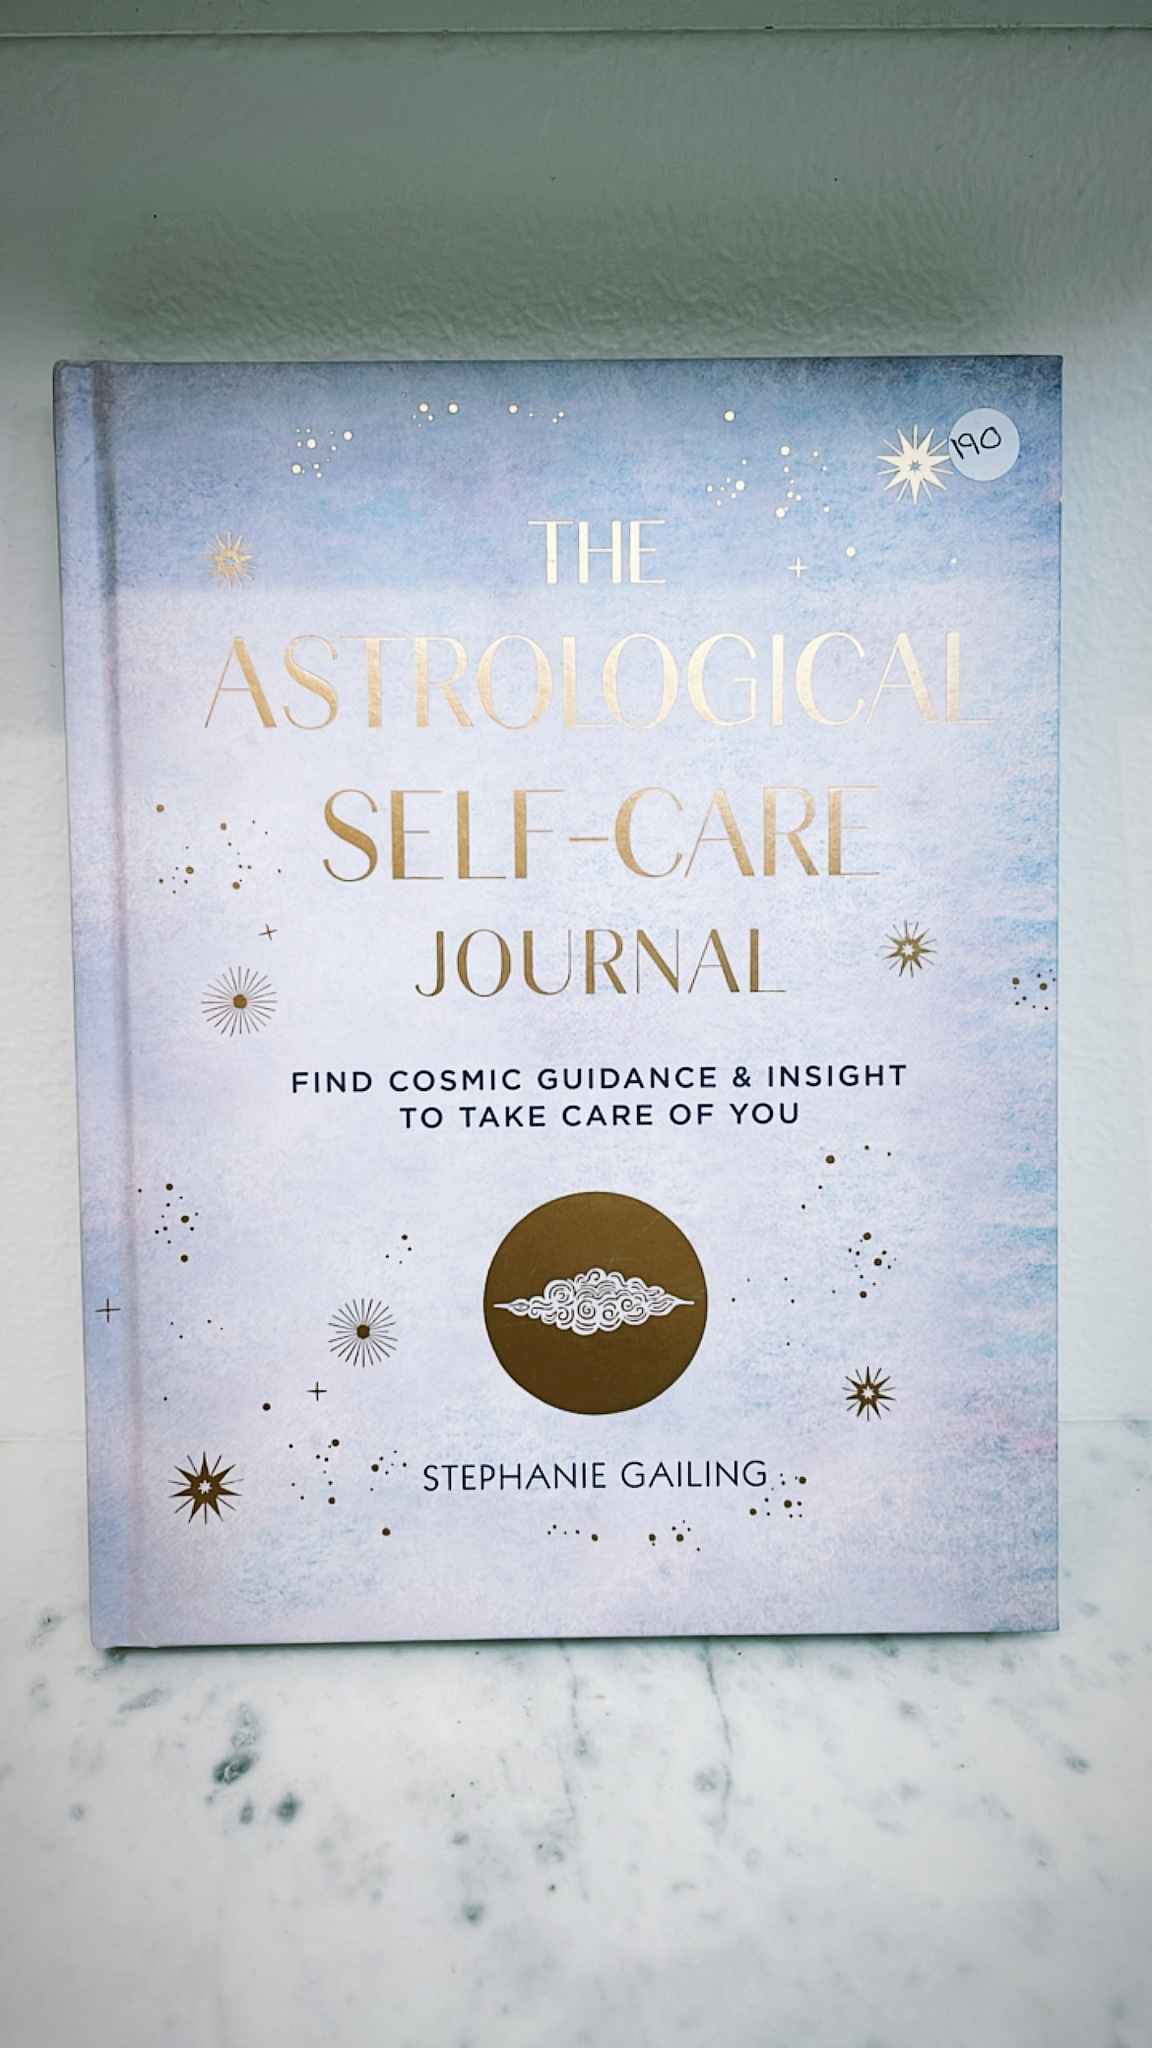 The Astrological Self-Care Journal